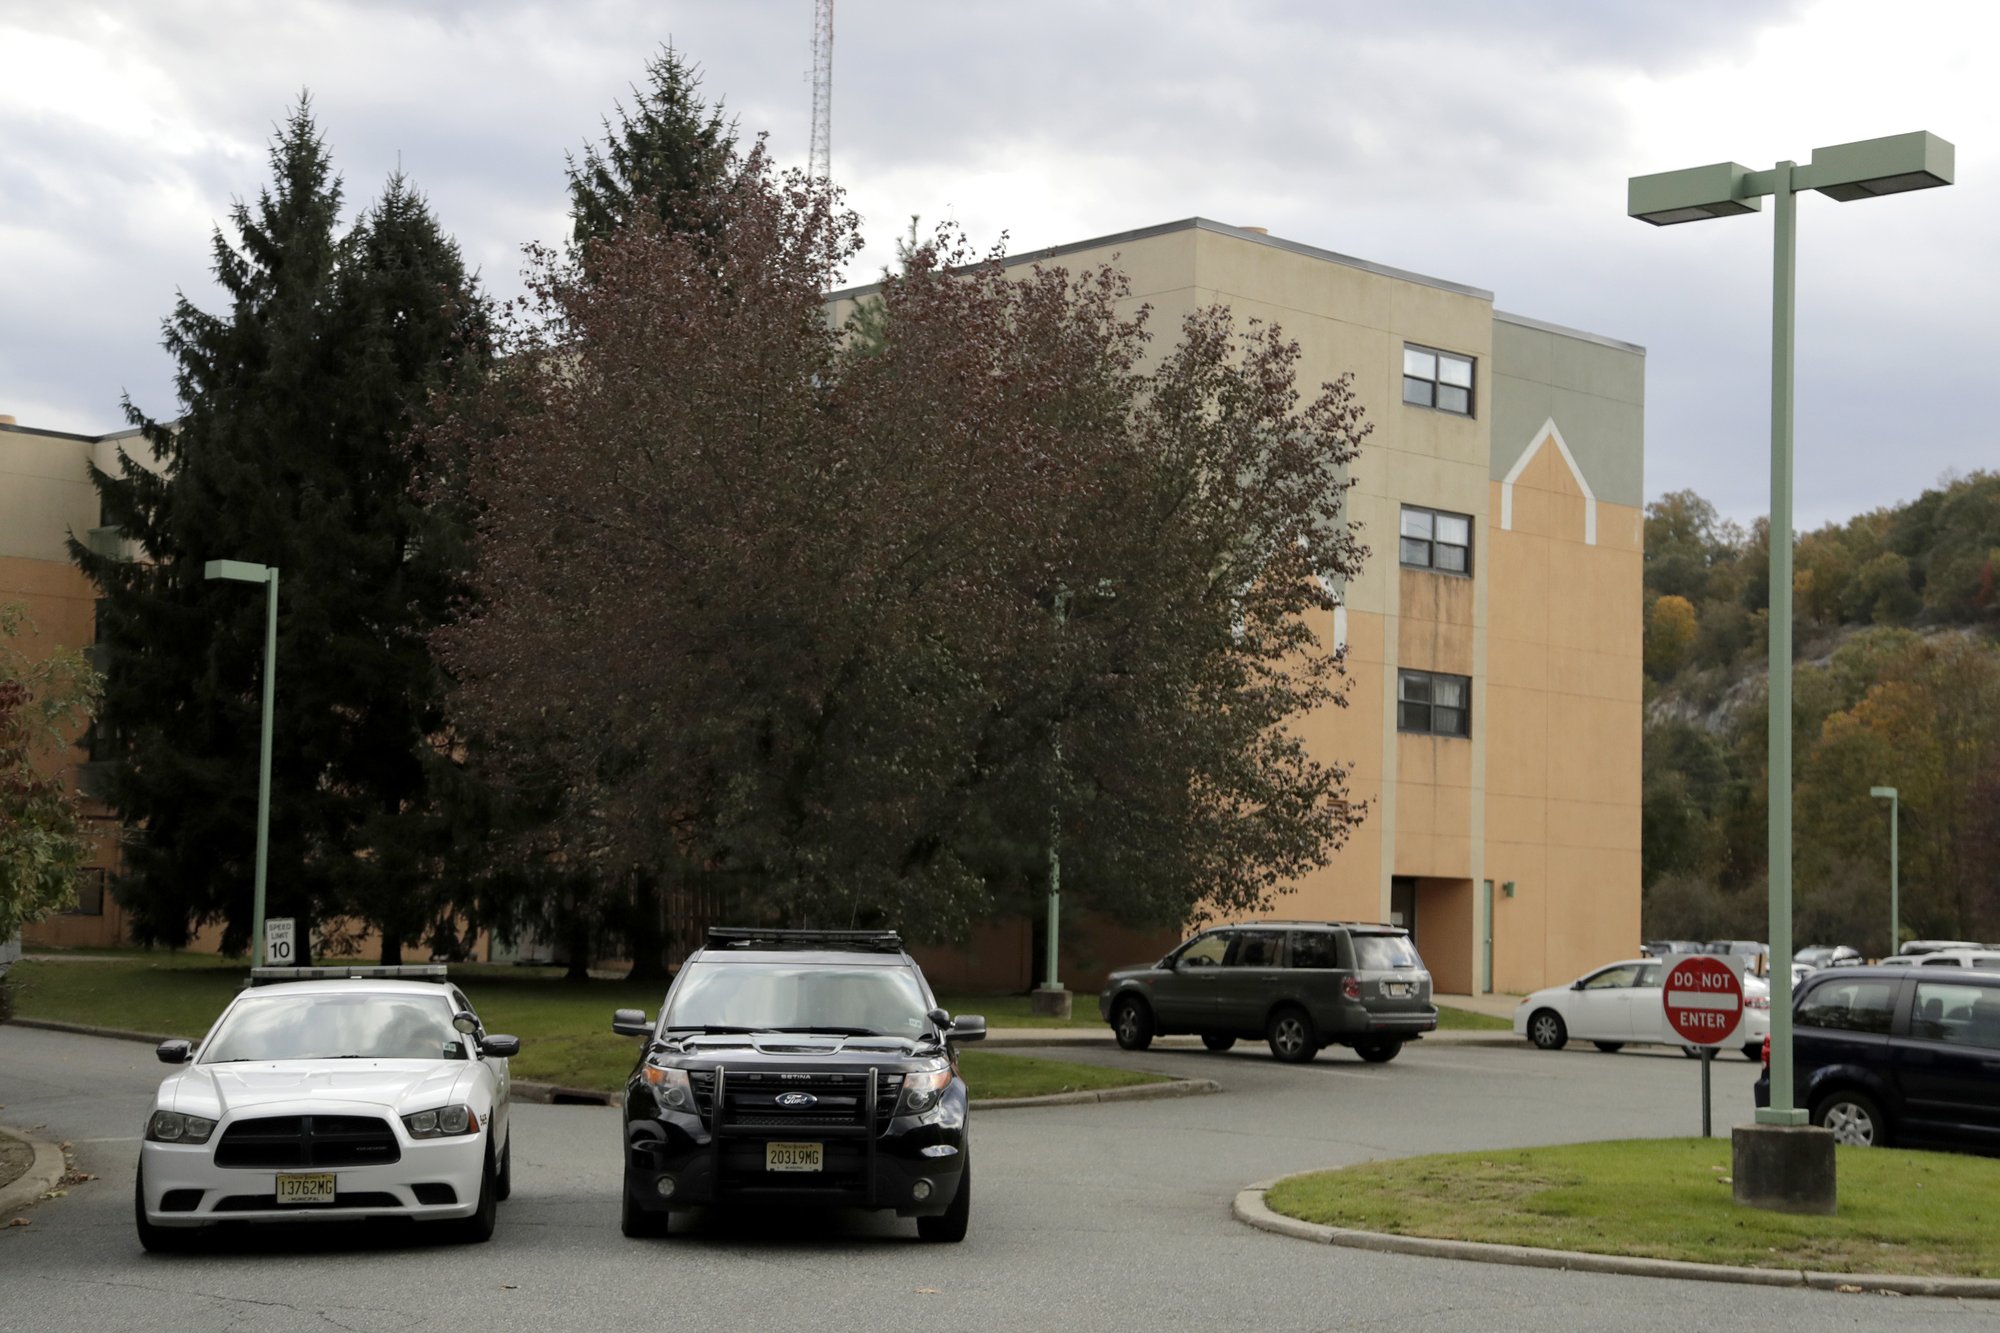 Police cruisers are seen parked near the entrance of the Wanaque Center For Nursing And Rehabilitation, where New Jersey state Health Department confirmed the 18 cases of adenovirus, on Tuesday, Oct. 23, 2018, in Haskell, N.J. Photo: AP